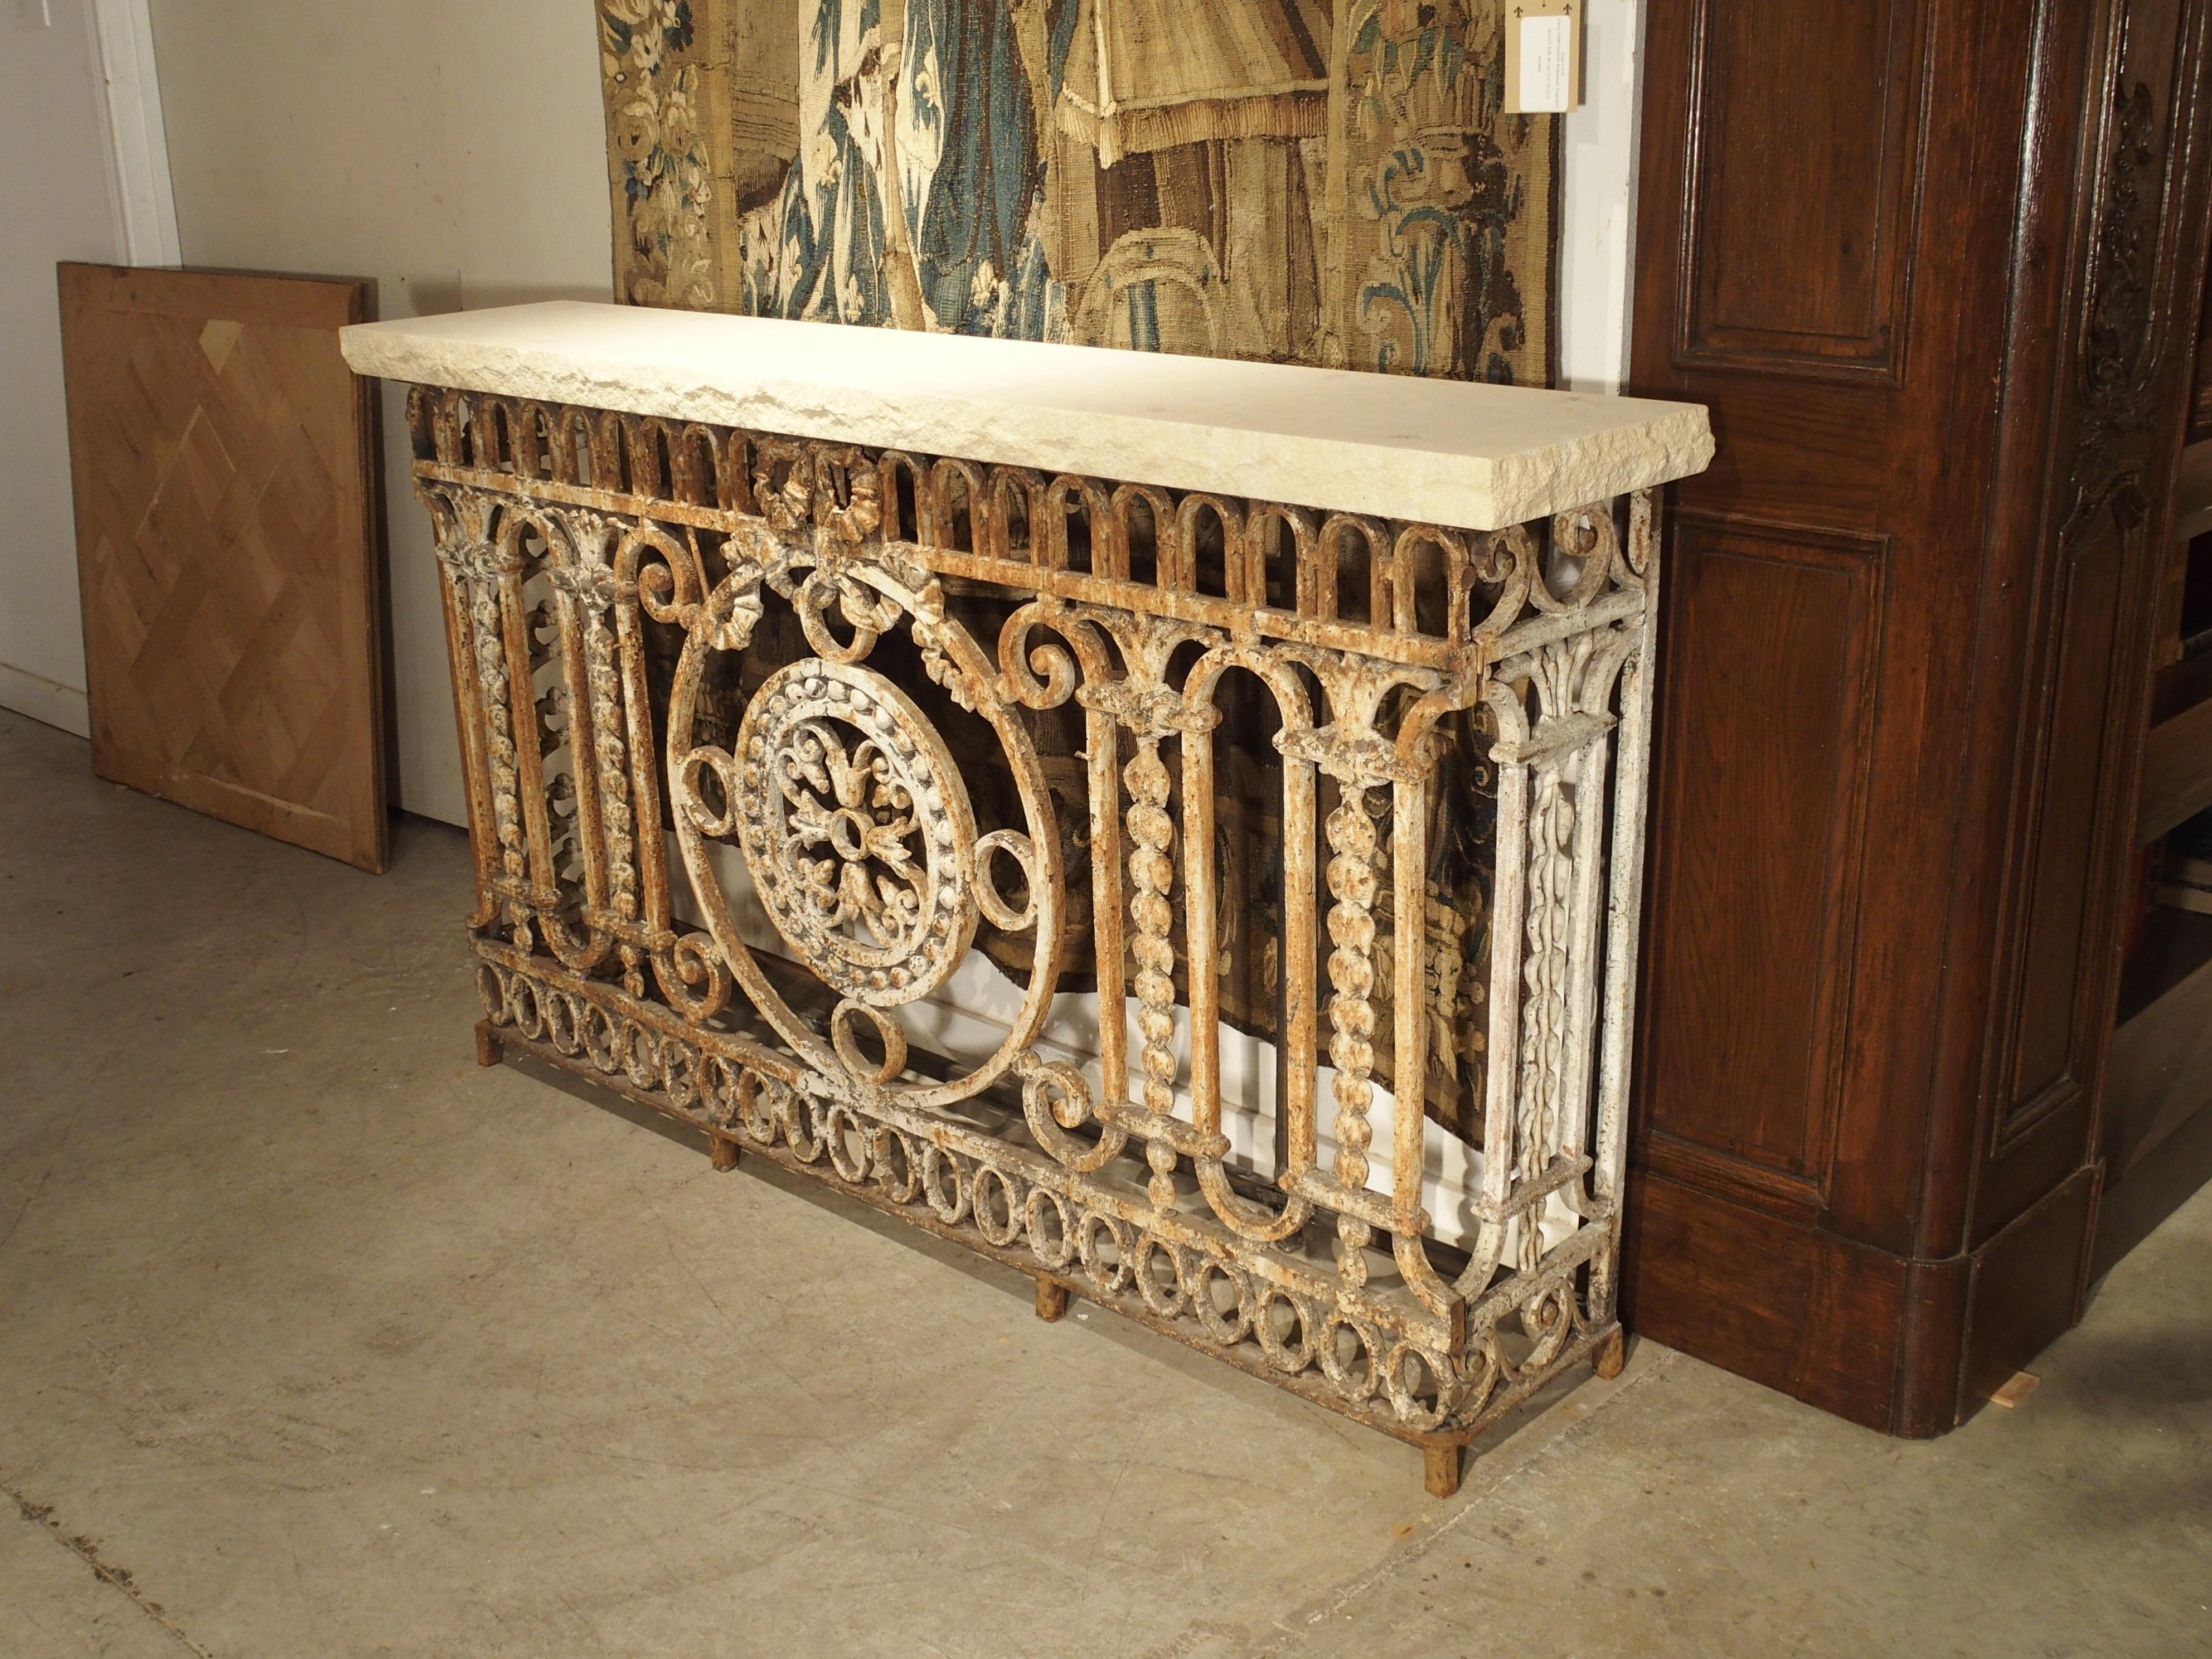 Originally functioning as a balcony barrier, this antique painted wrought iron railing has been repurposed into a console table with a cream-colored limestone top. It was salvaged from a French style building in Argentina, which would have been